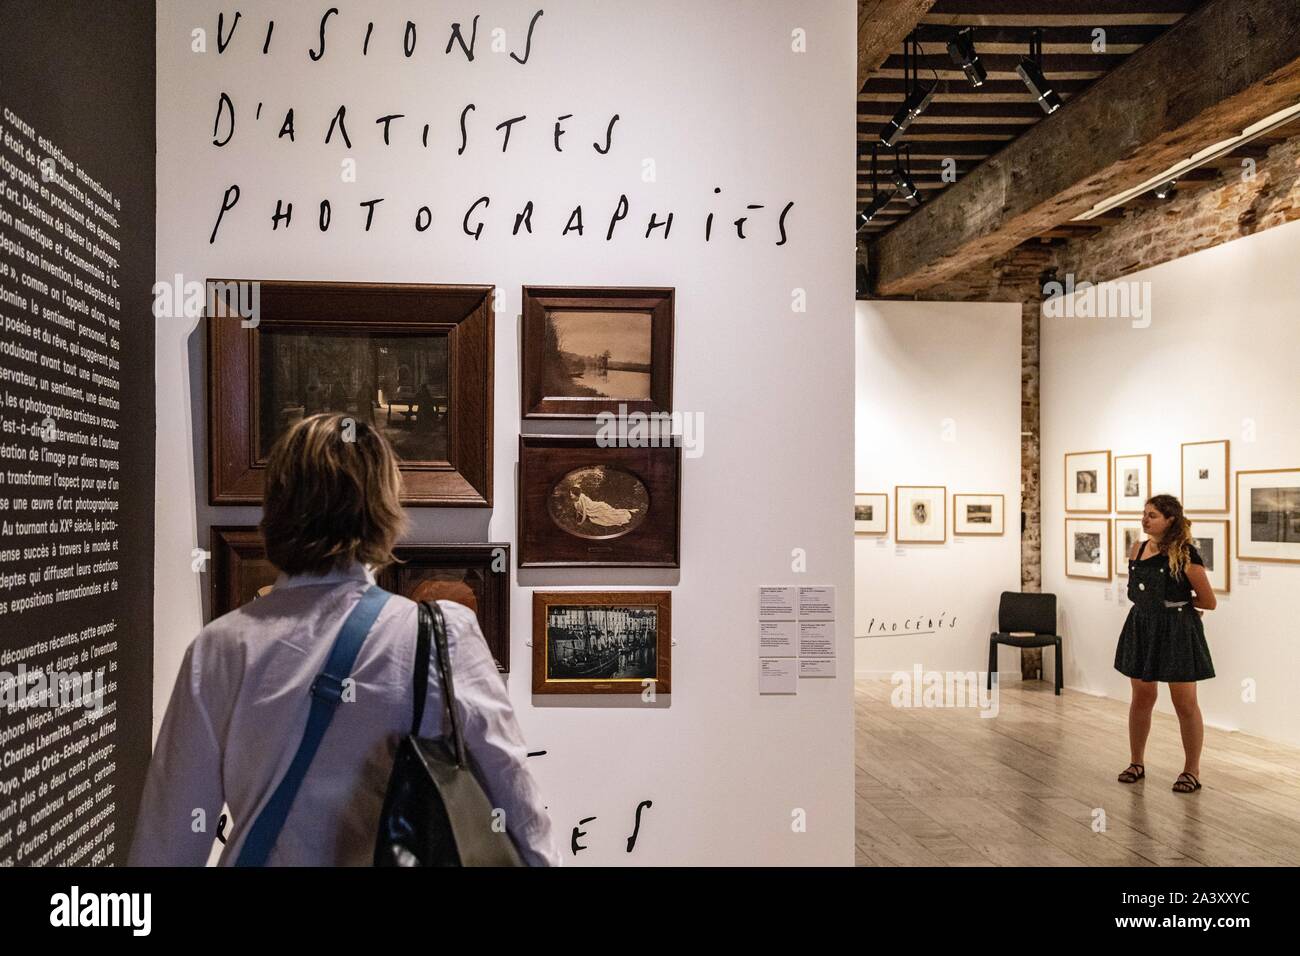 PHOTO EXHIBITION ROOM, 'VISIONS D'ARTISTES', NICEPHORE NIEPCE PHOTOGRAPHY MUSEUM, CHALON-SUR-SAONE (71), FRANCE Stock Photo